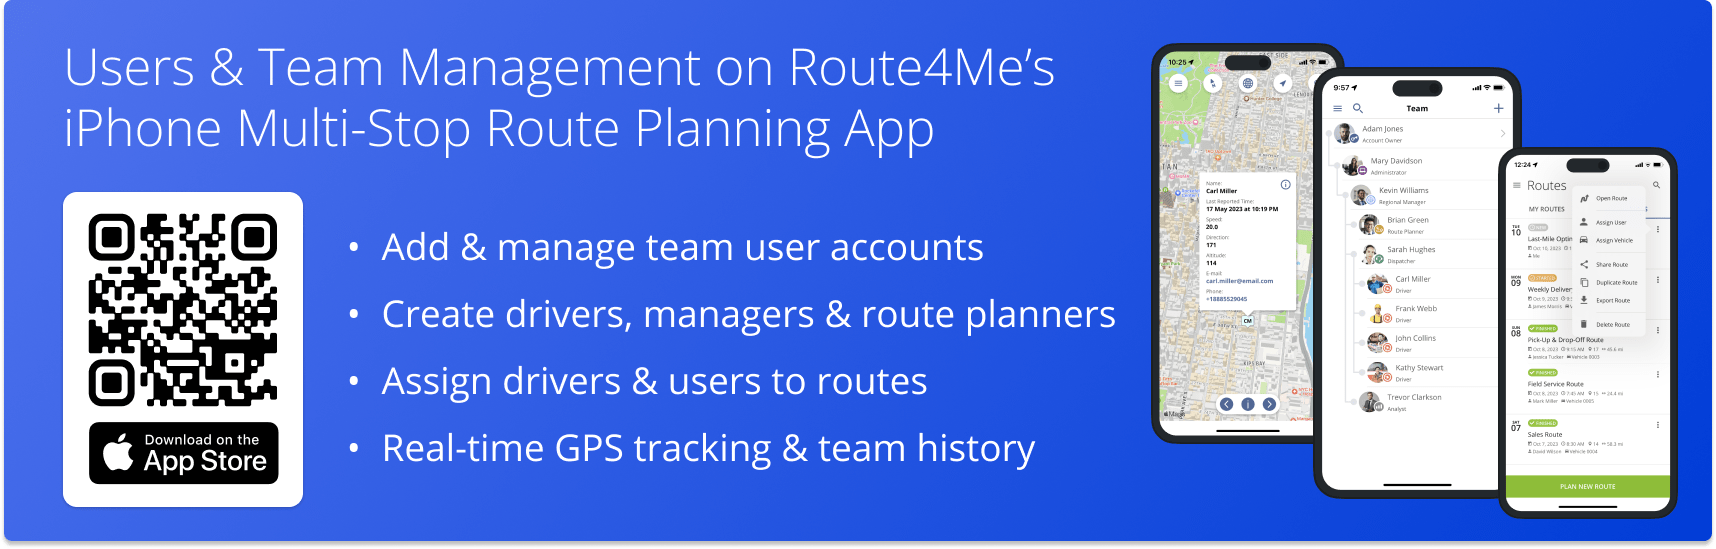 Drivers, managers, dispatchers, and team management, route dispatch, and GPS team tracking on Route4Me's iPhone Route Planning app.